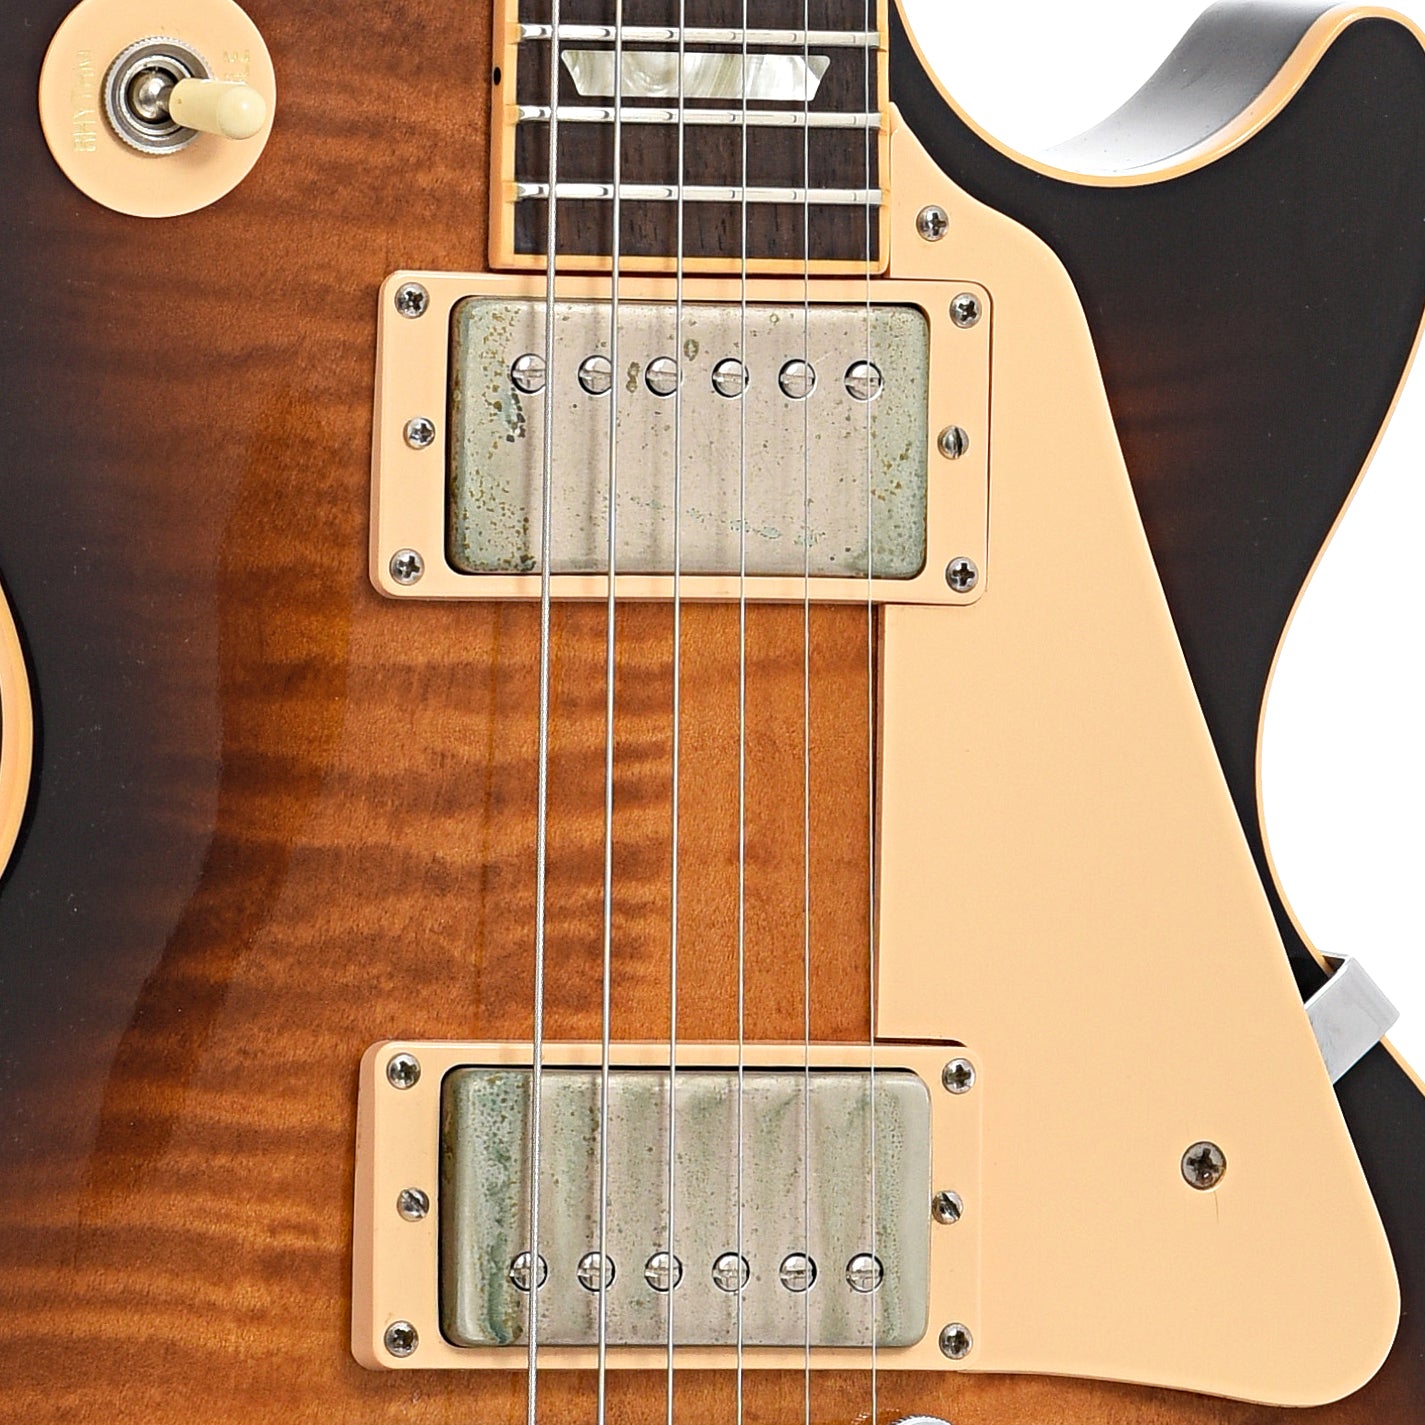 Pickups of Gibson Les Paul Traditional Electric Guitar (2008)